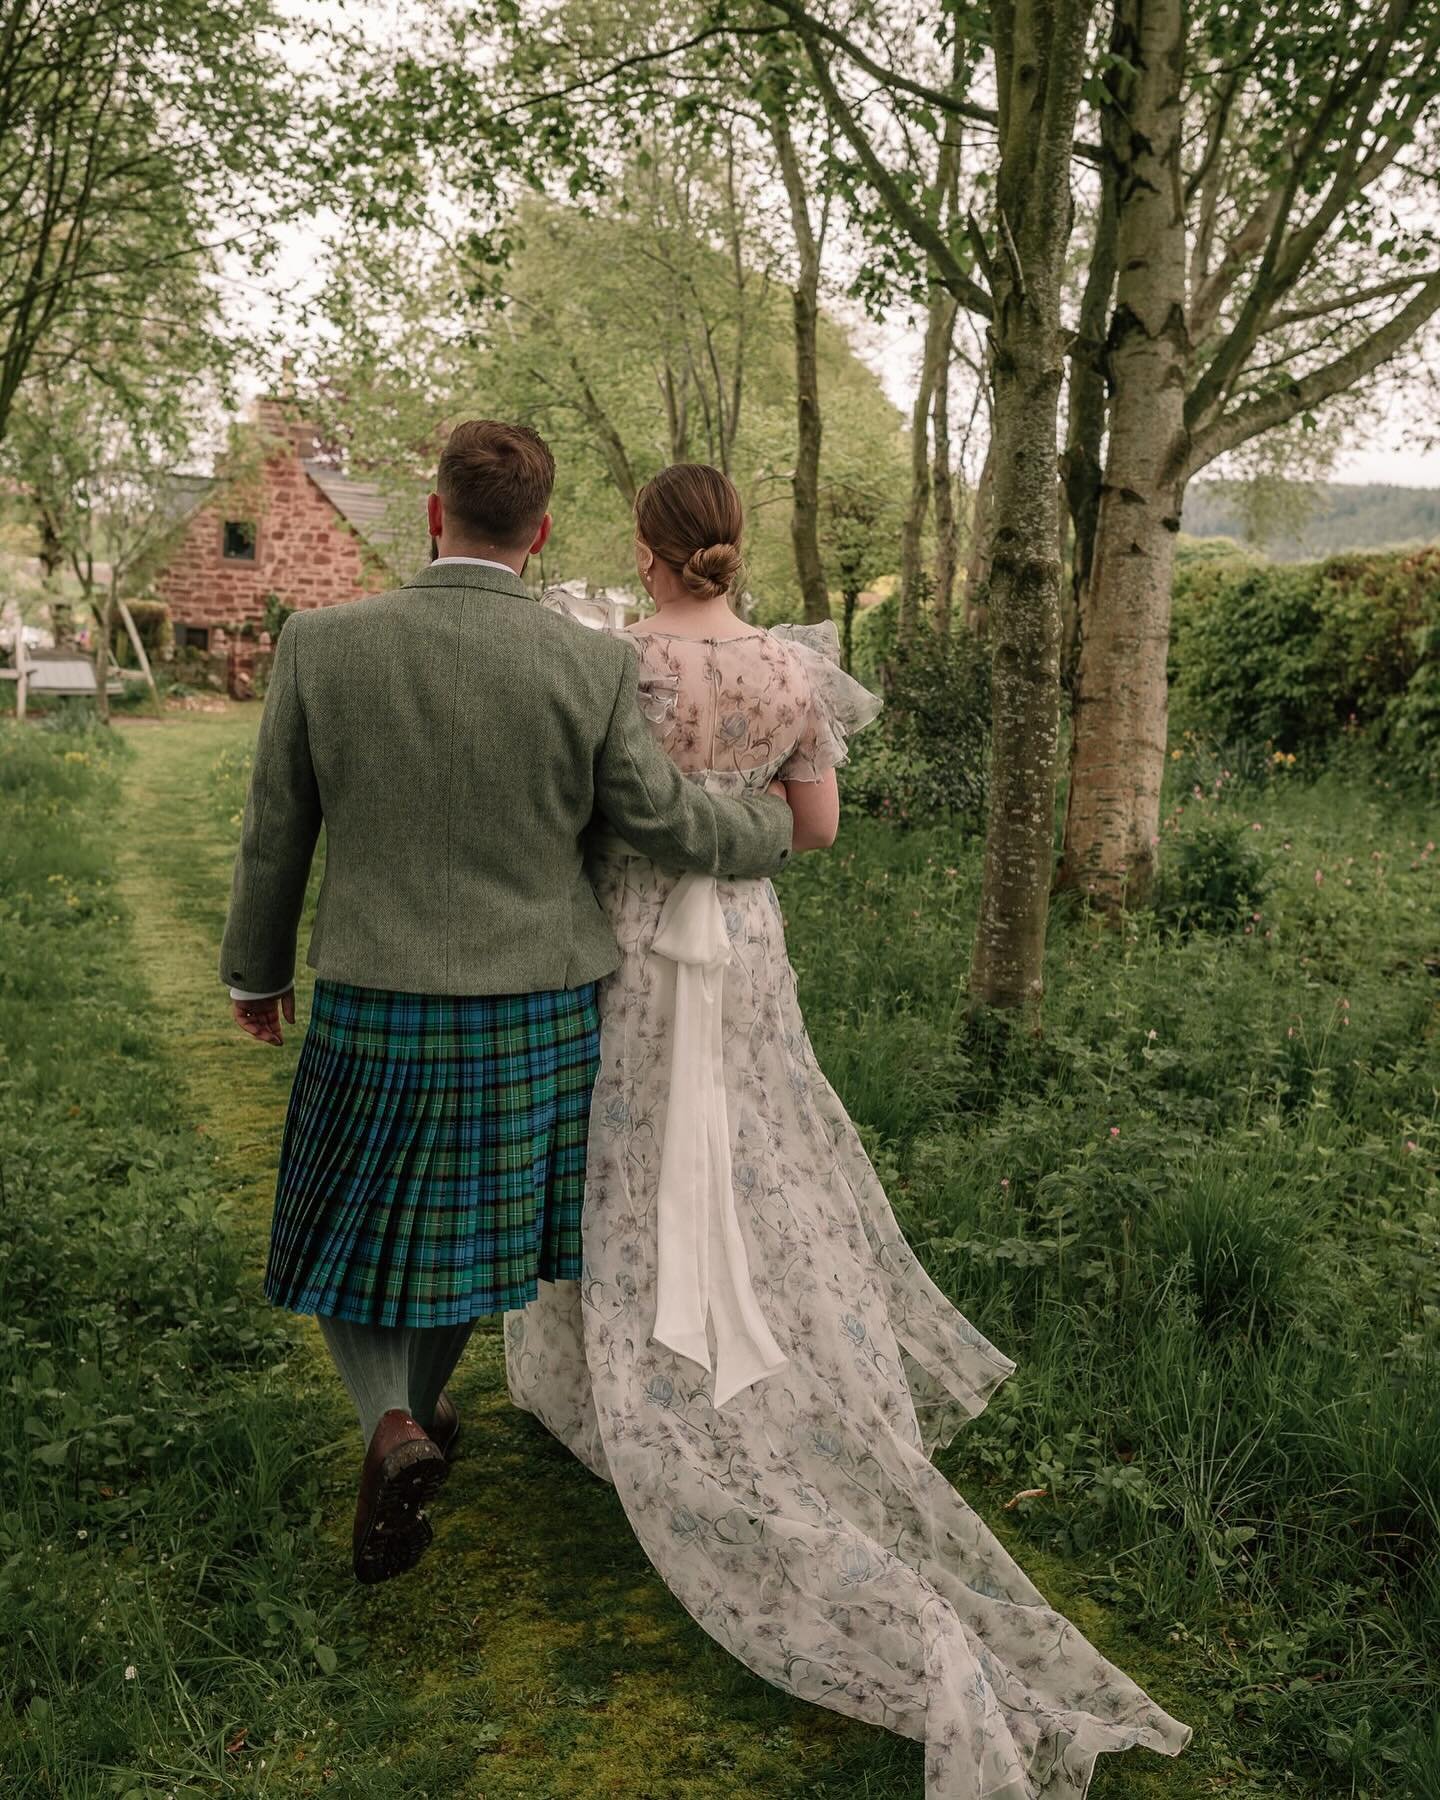 Sending many congratulations to Liam &amp; Alice who are celebrating their first wedding anniversary today 🎉
.
They hosted their celebrations in the garden of their family home, which was just gorgeous!
Such a fun one to be involved in 🥰
.
Hope you